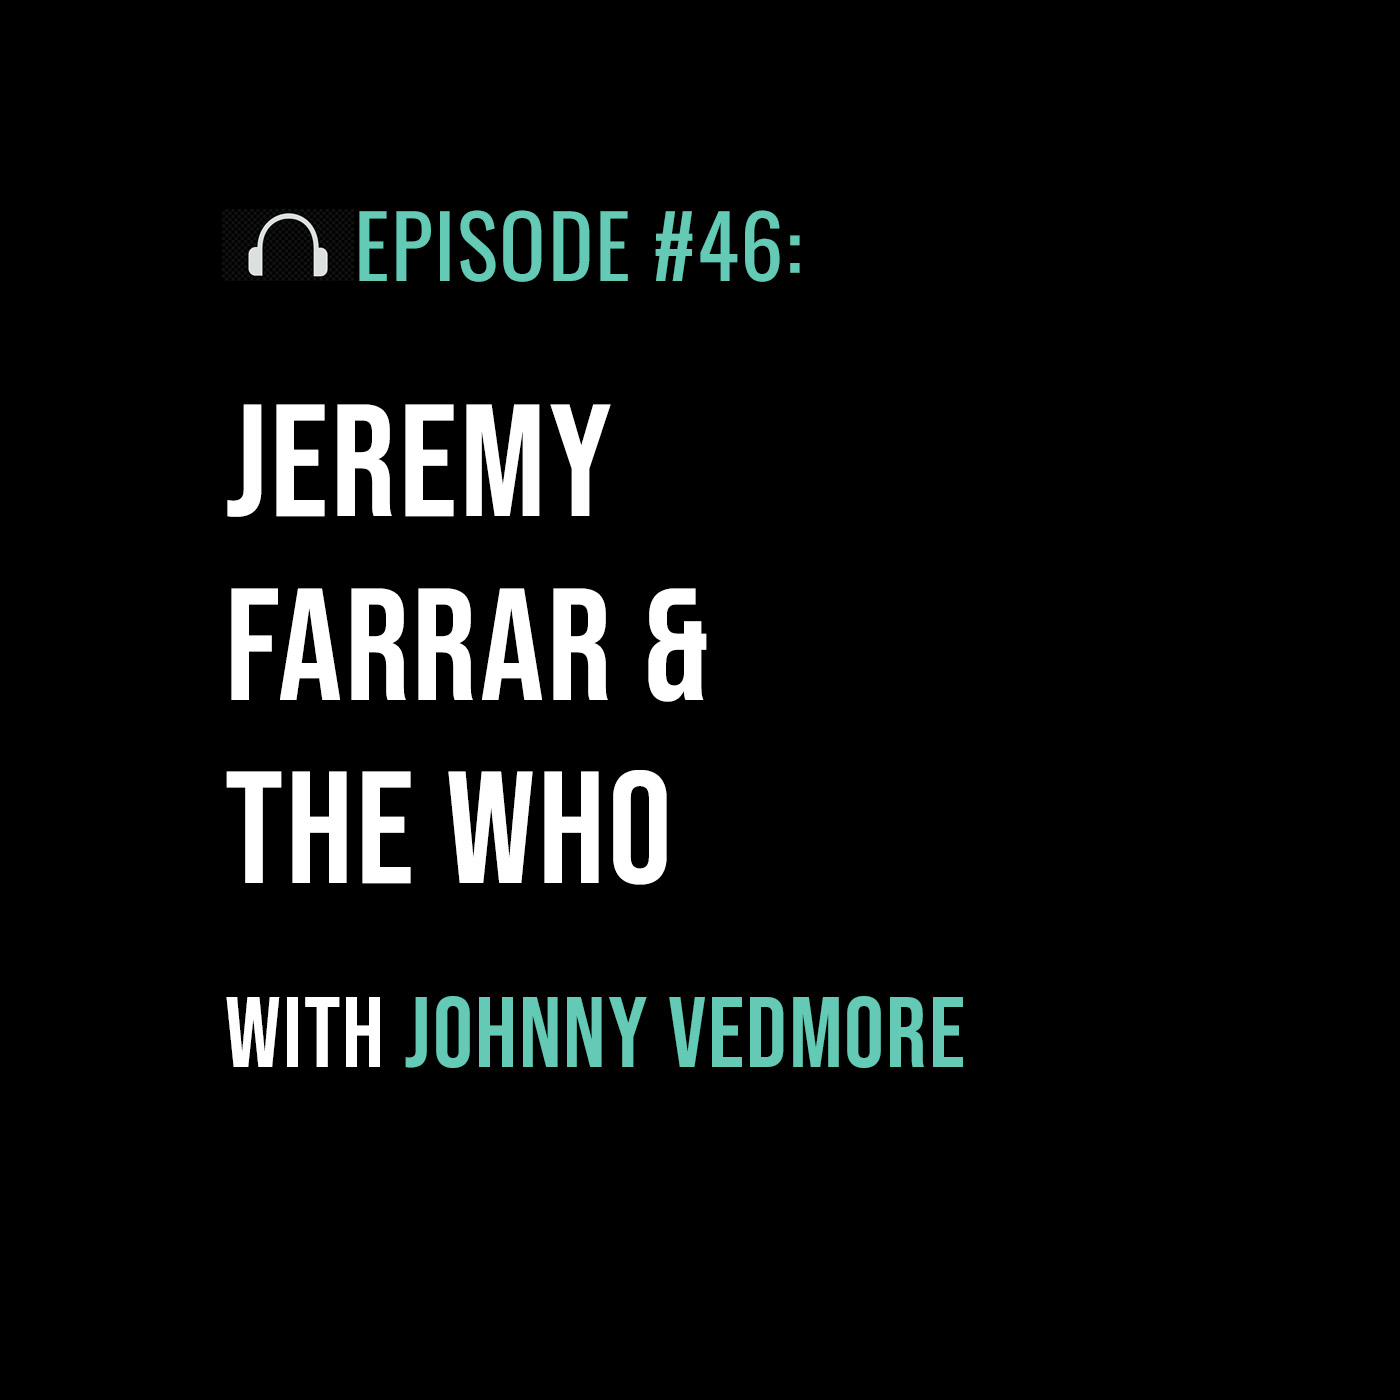 Jeremy Farrar and the WHO with Johnny Vedmore